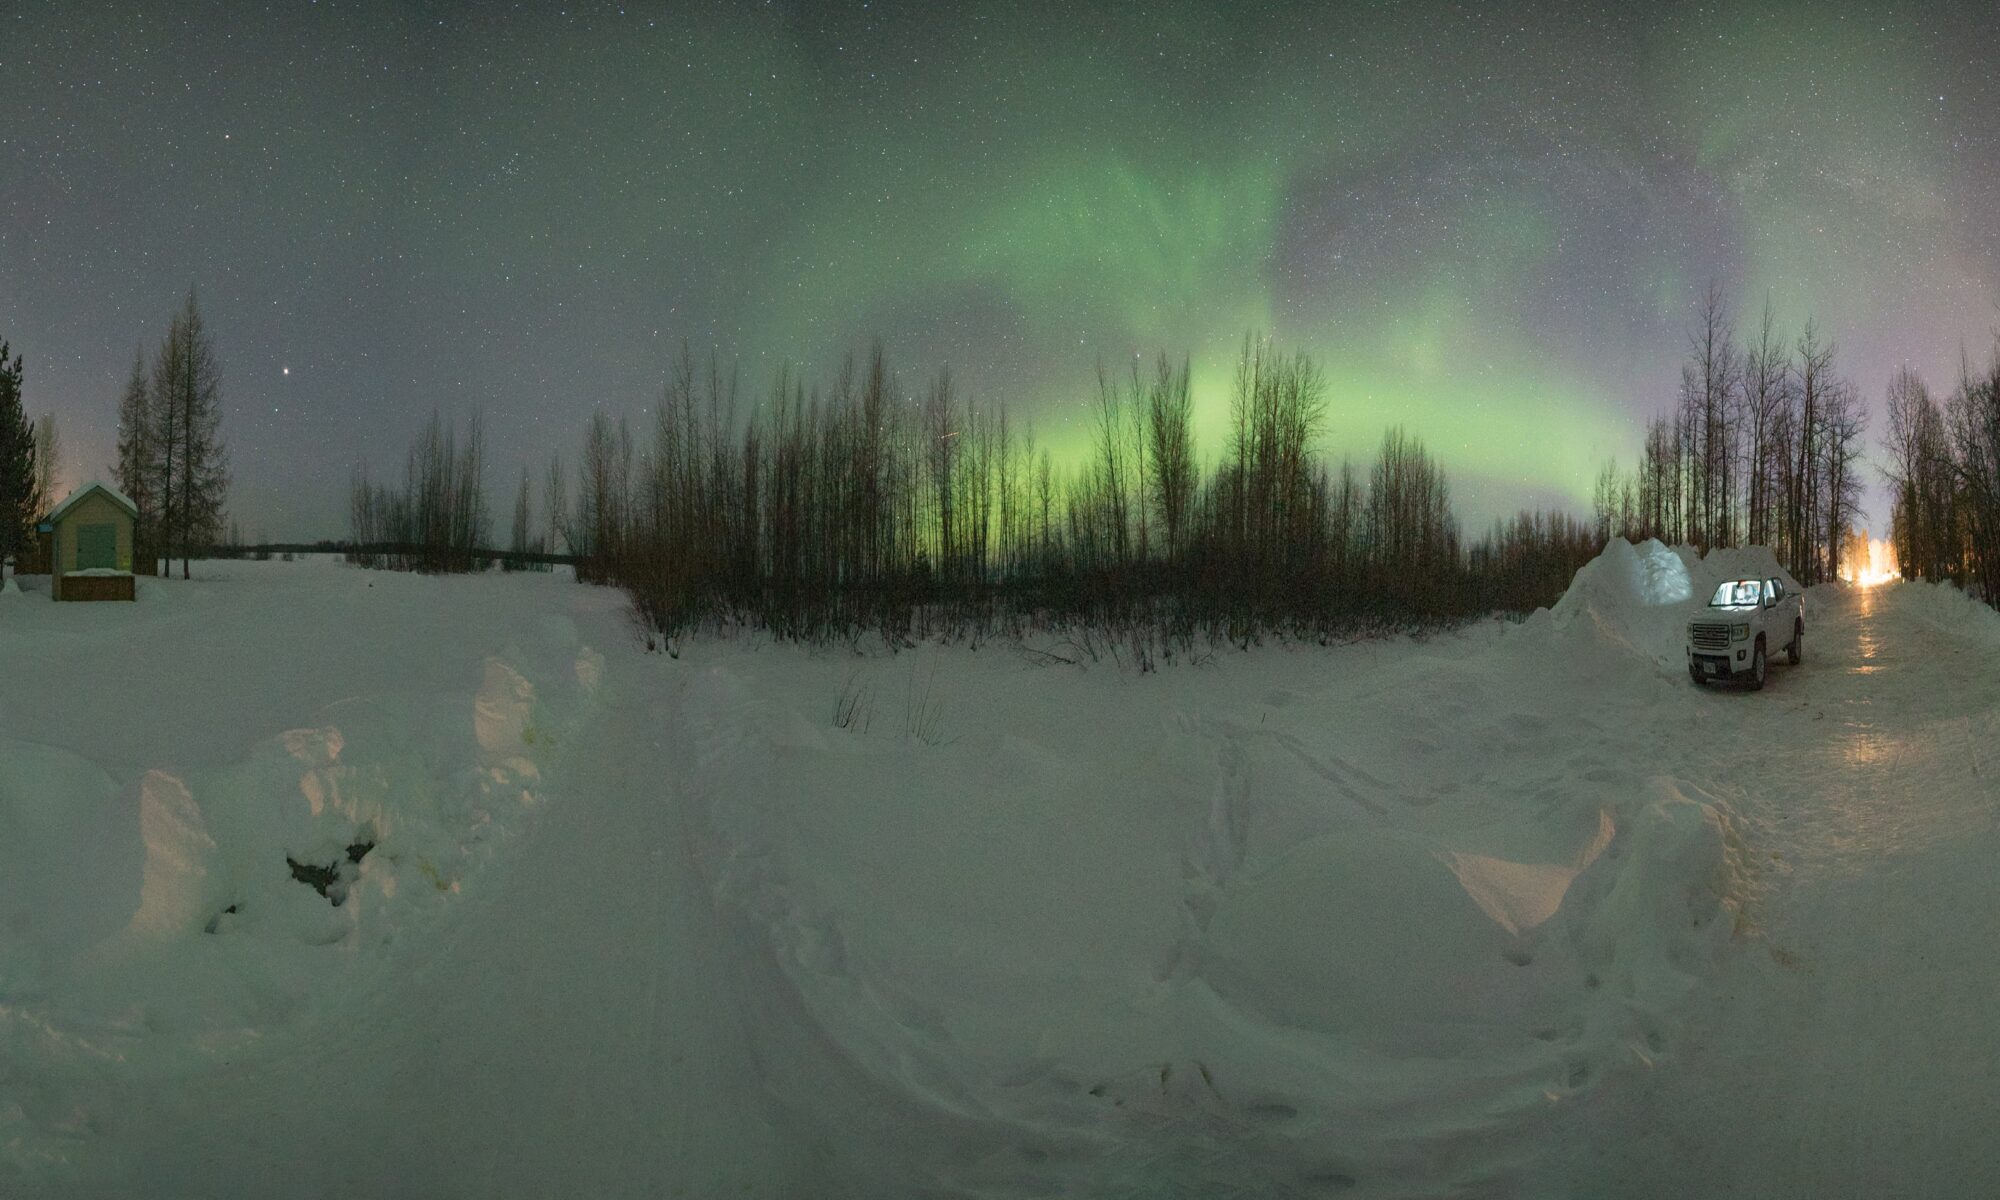 360 video shot of the Northern Lights